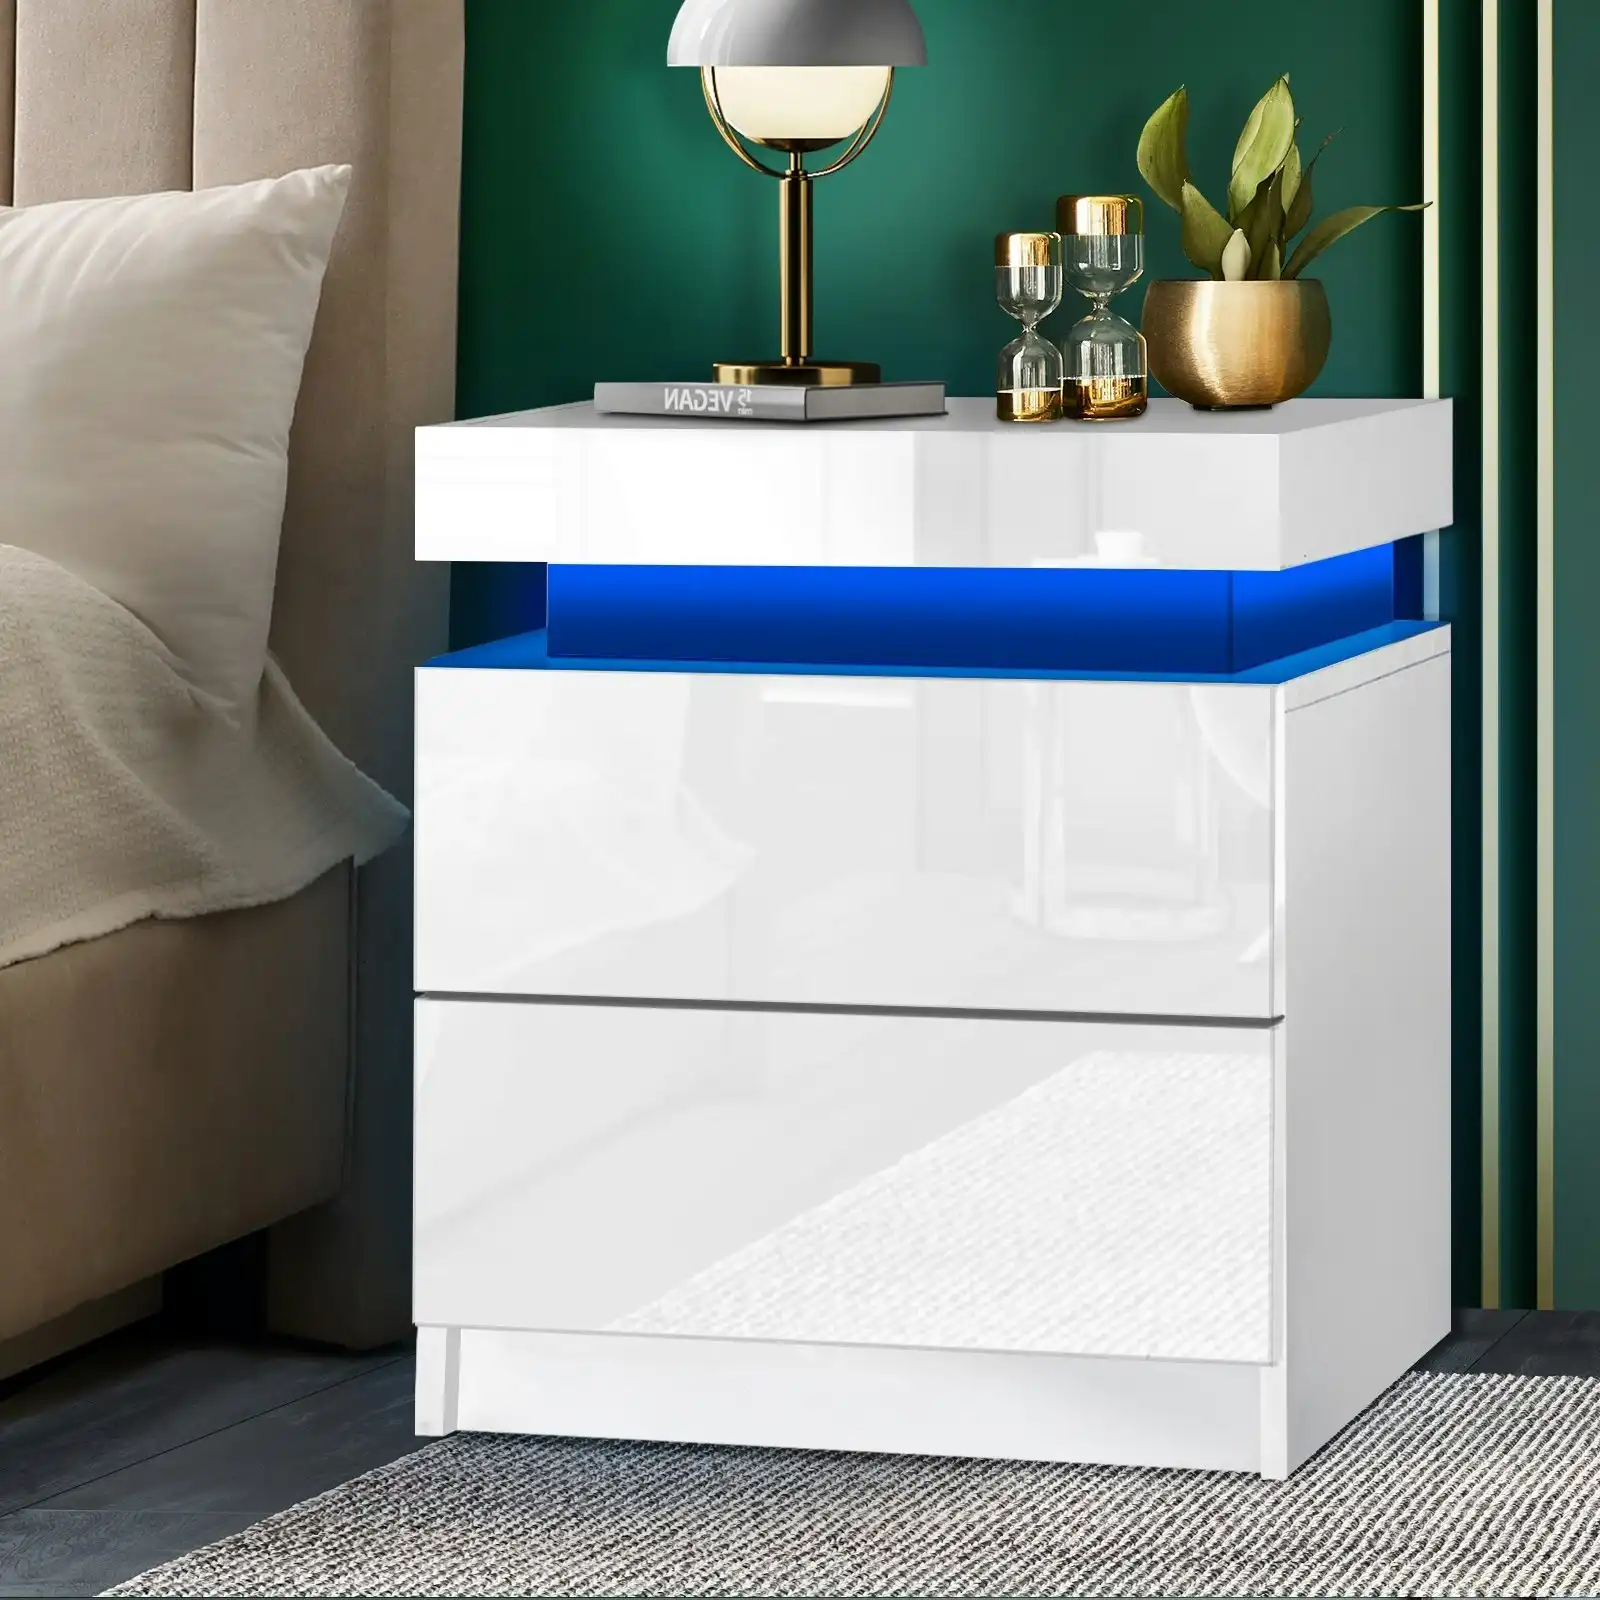 Oikiture Bedside Table RGB LED Nightstand Cabinet 2 Drawers Side Table Furniture White